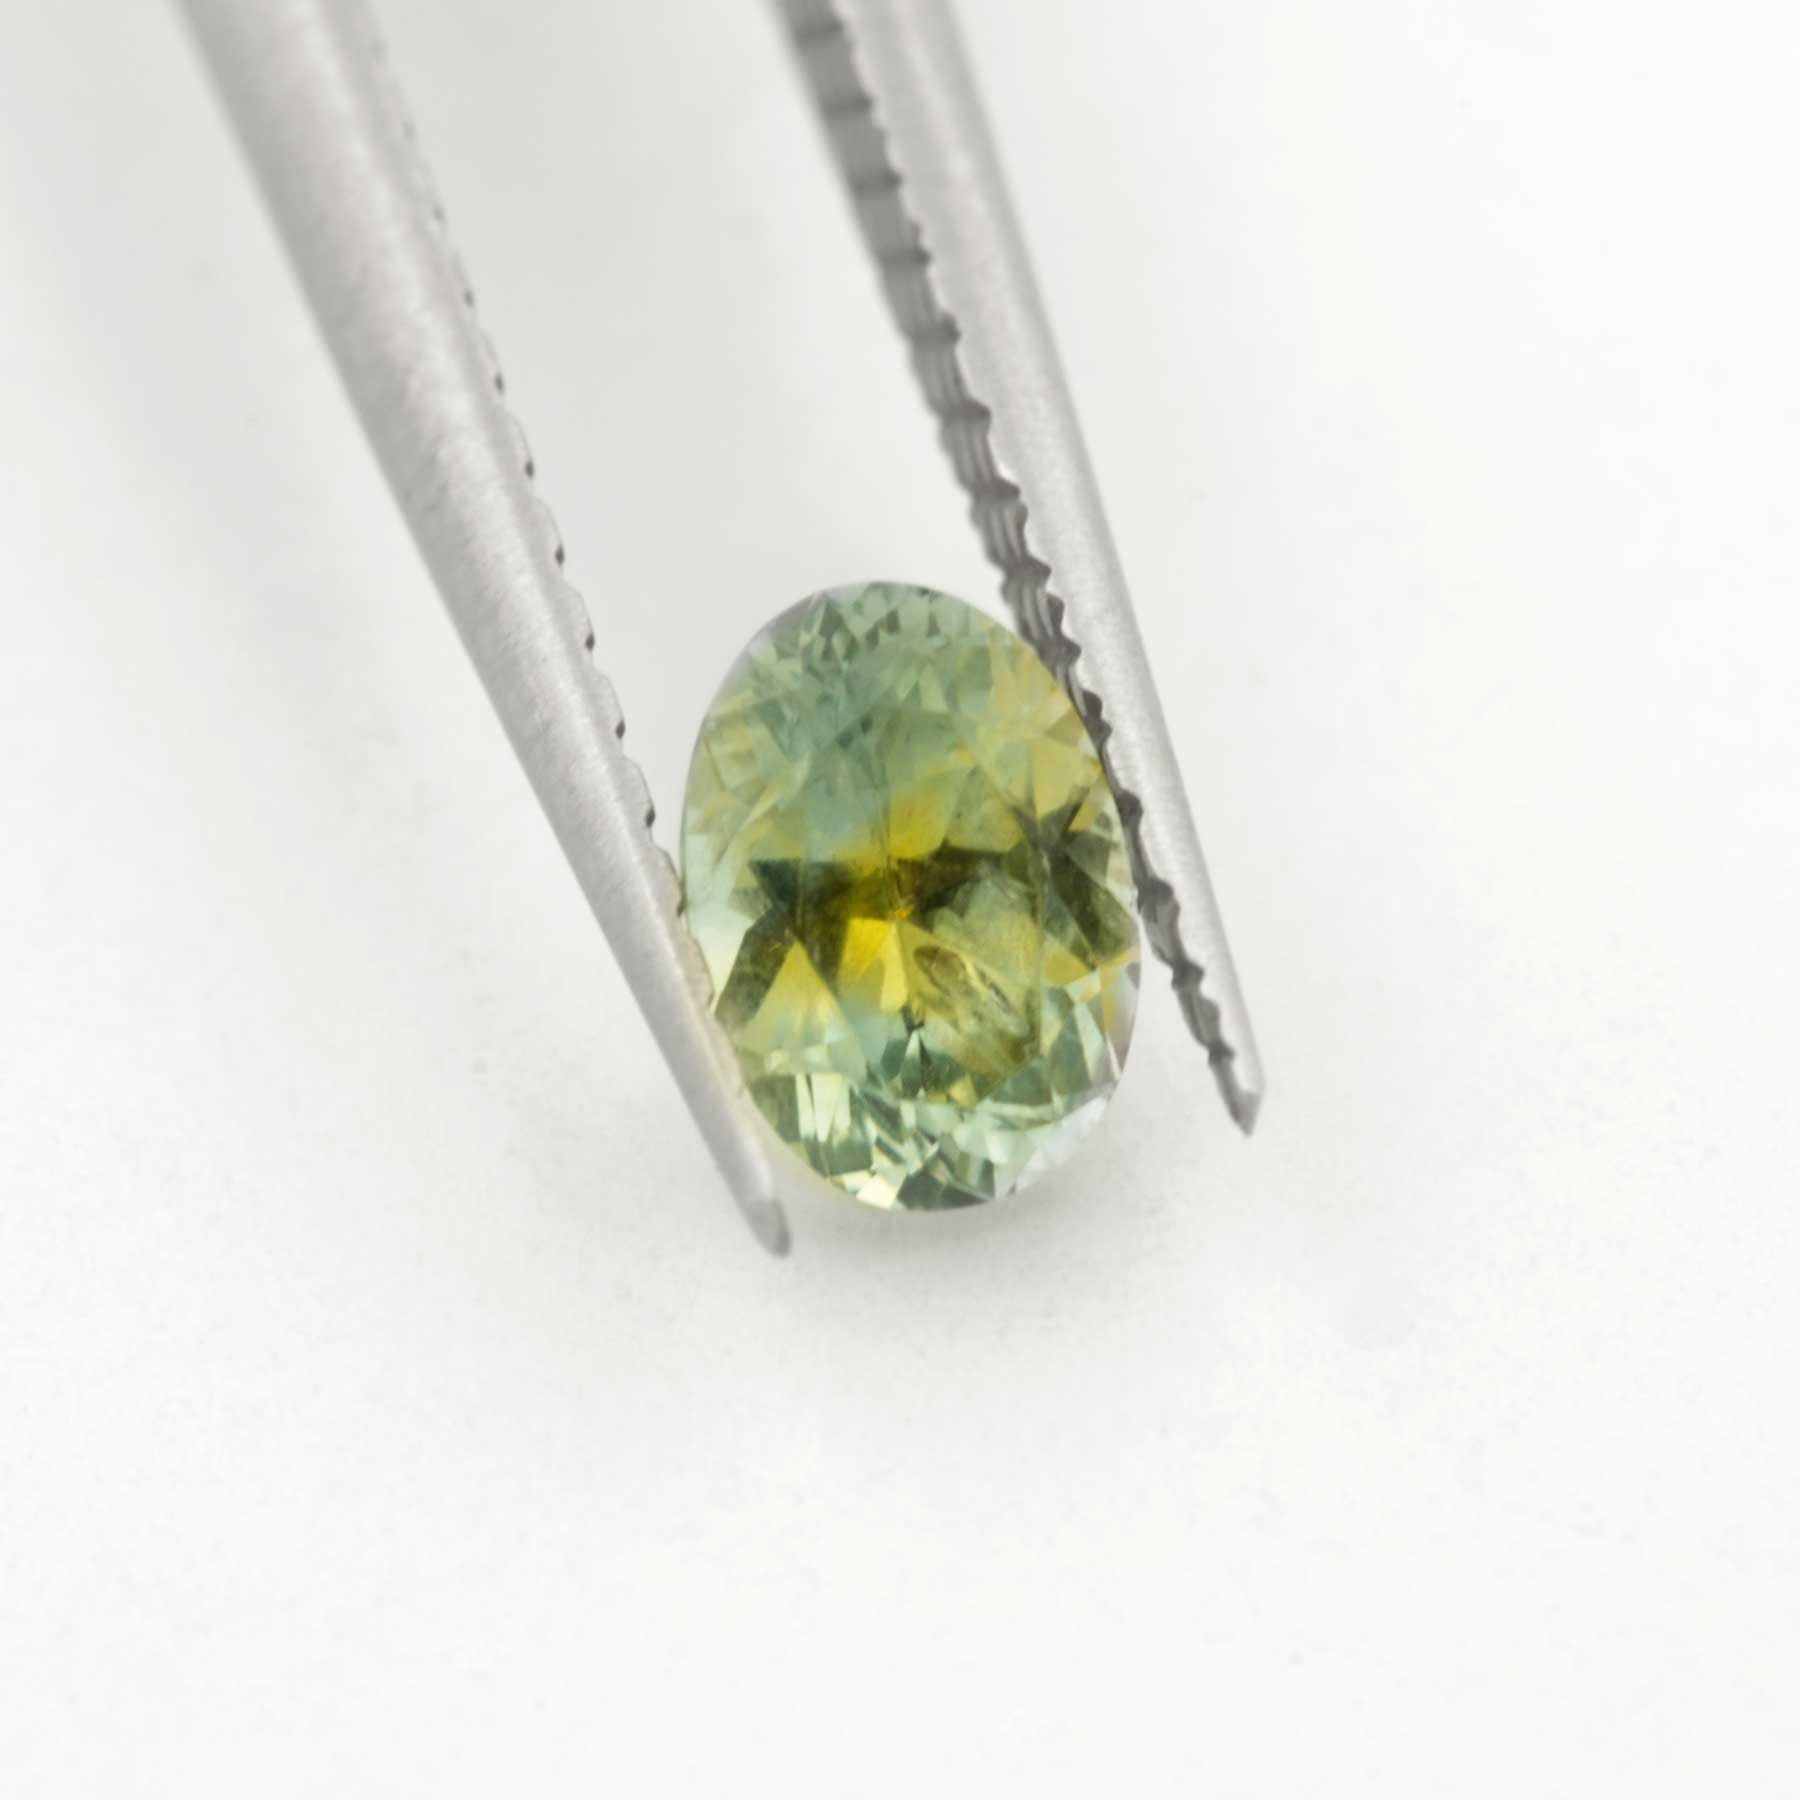 Unique ethical Montana mined sapphires now in!